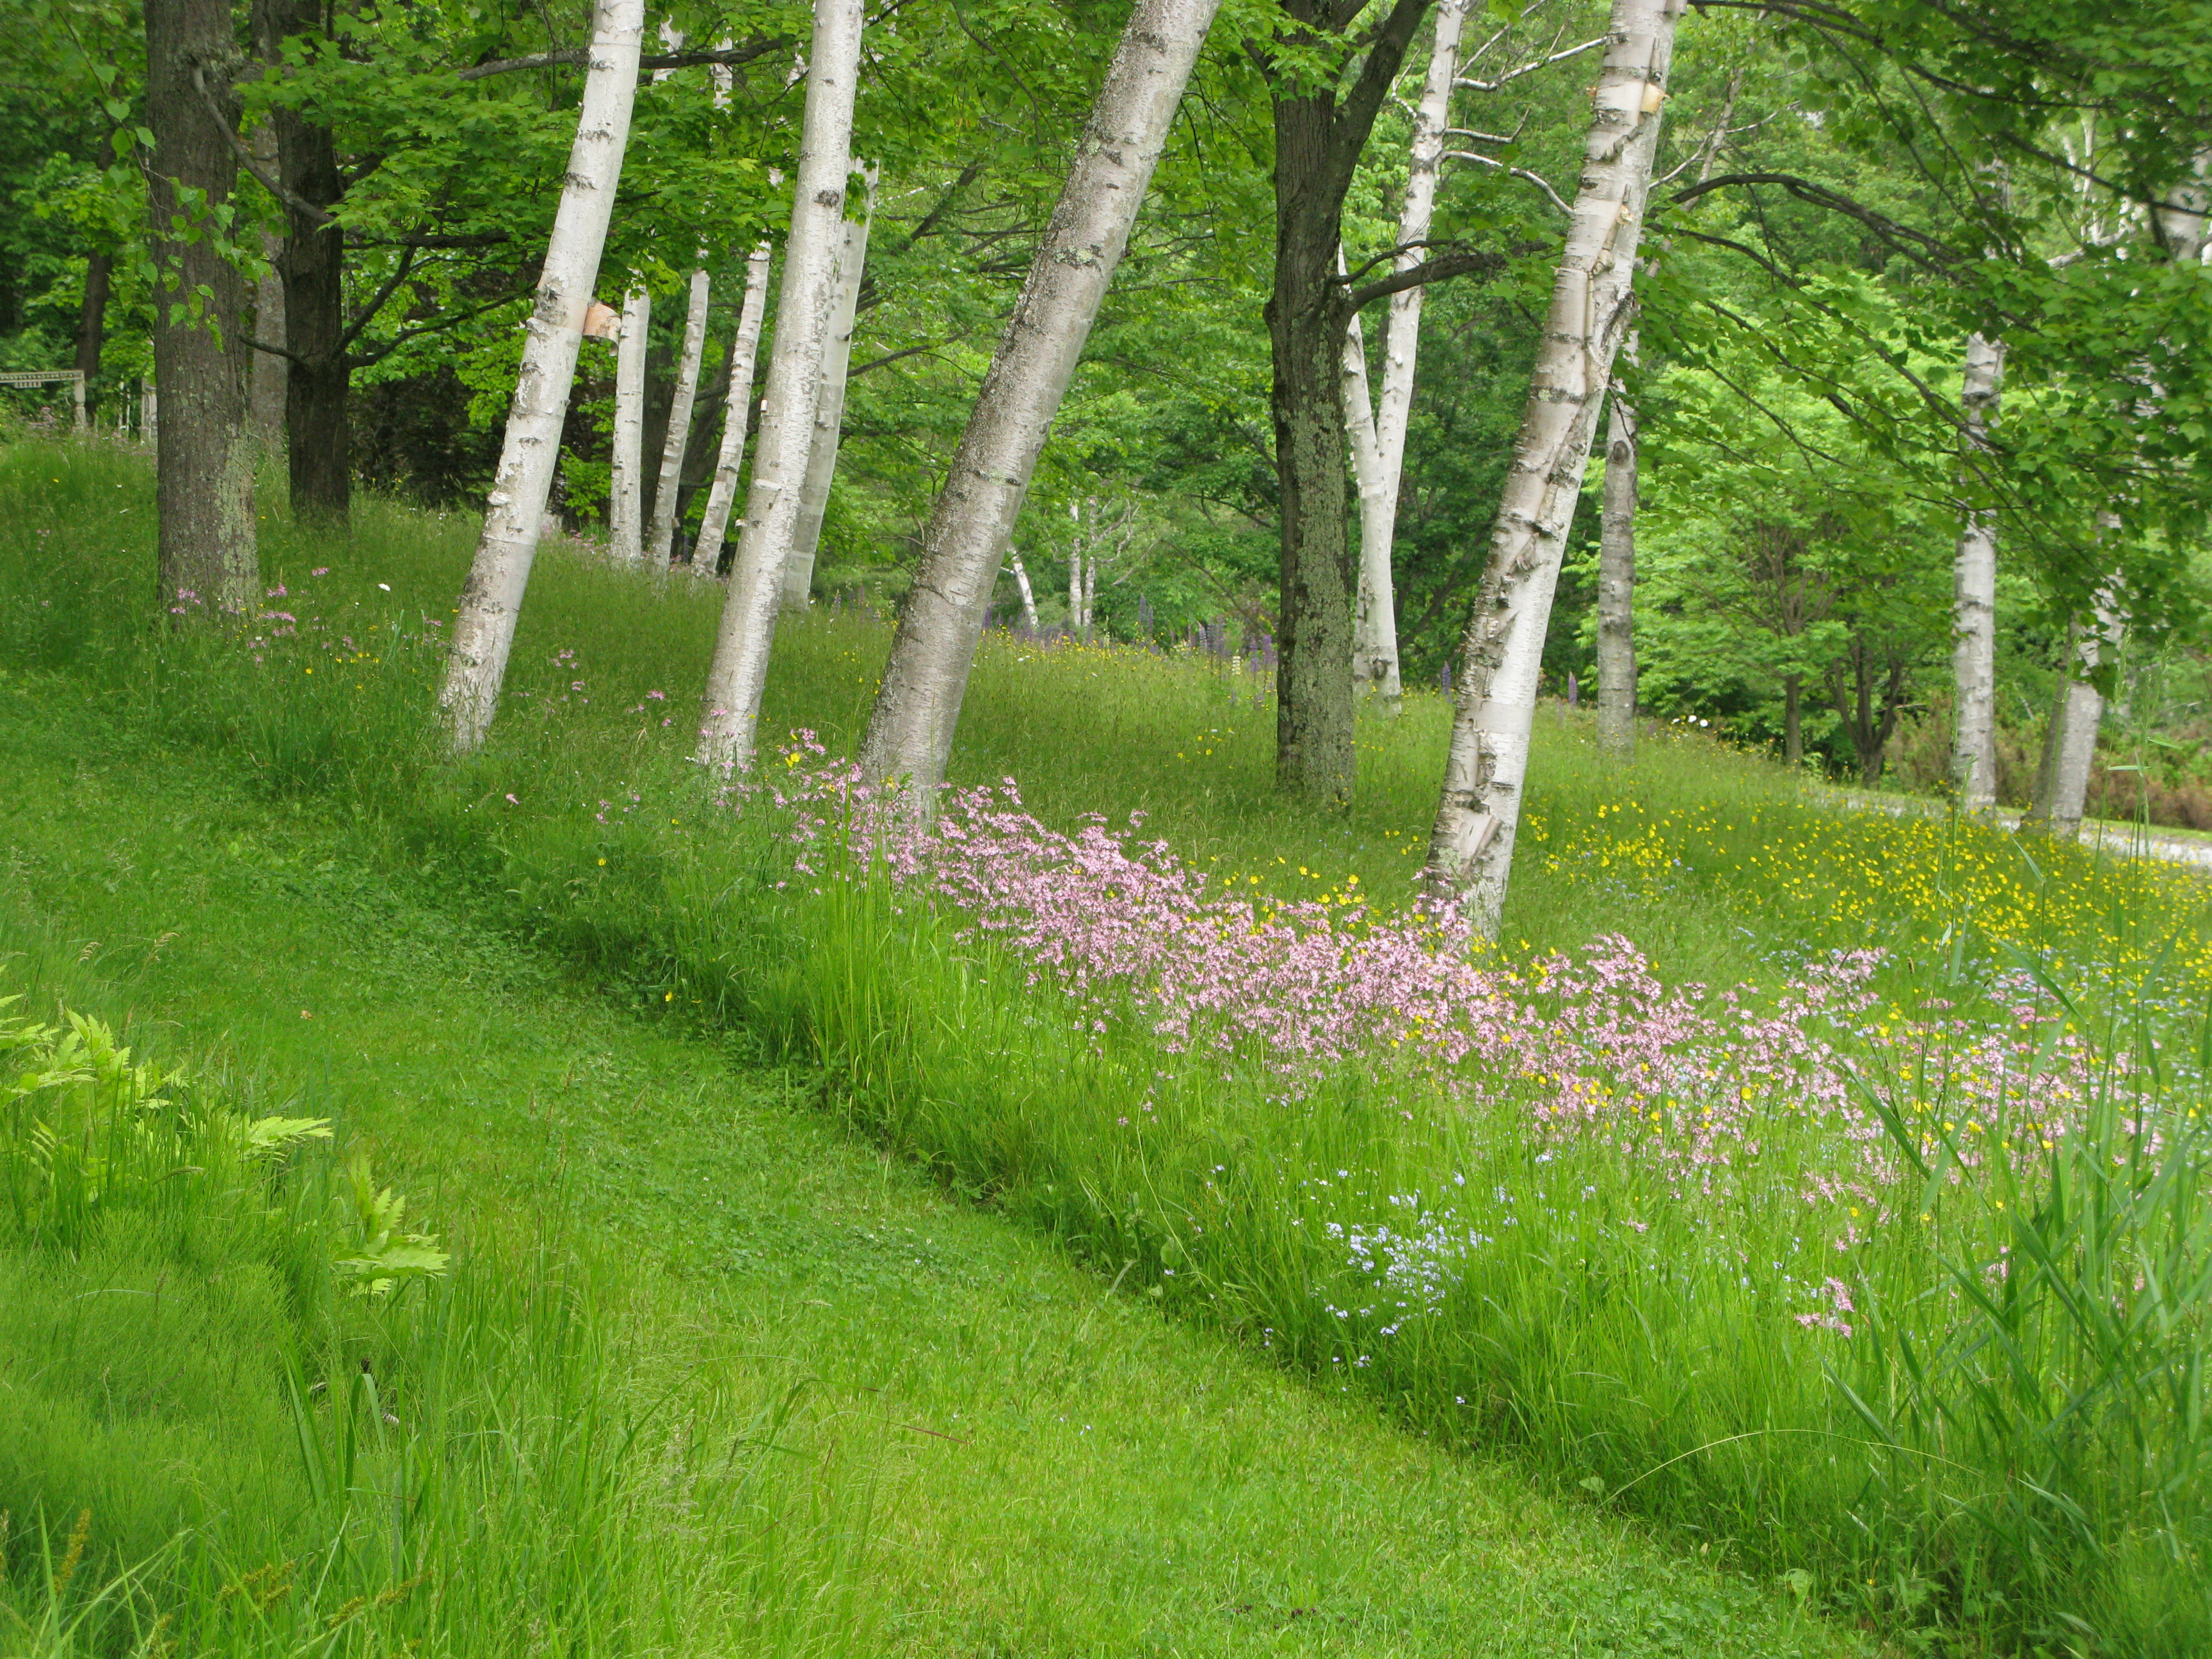 Ragged robin, lupins and buttercups edge the path that leads to the China Terrace, the re-creation of Glen Villa Inn.